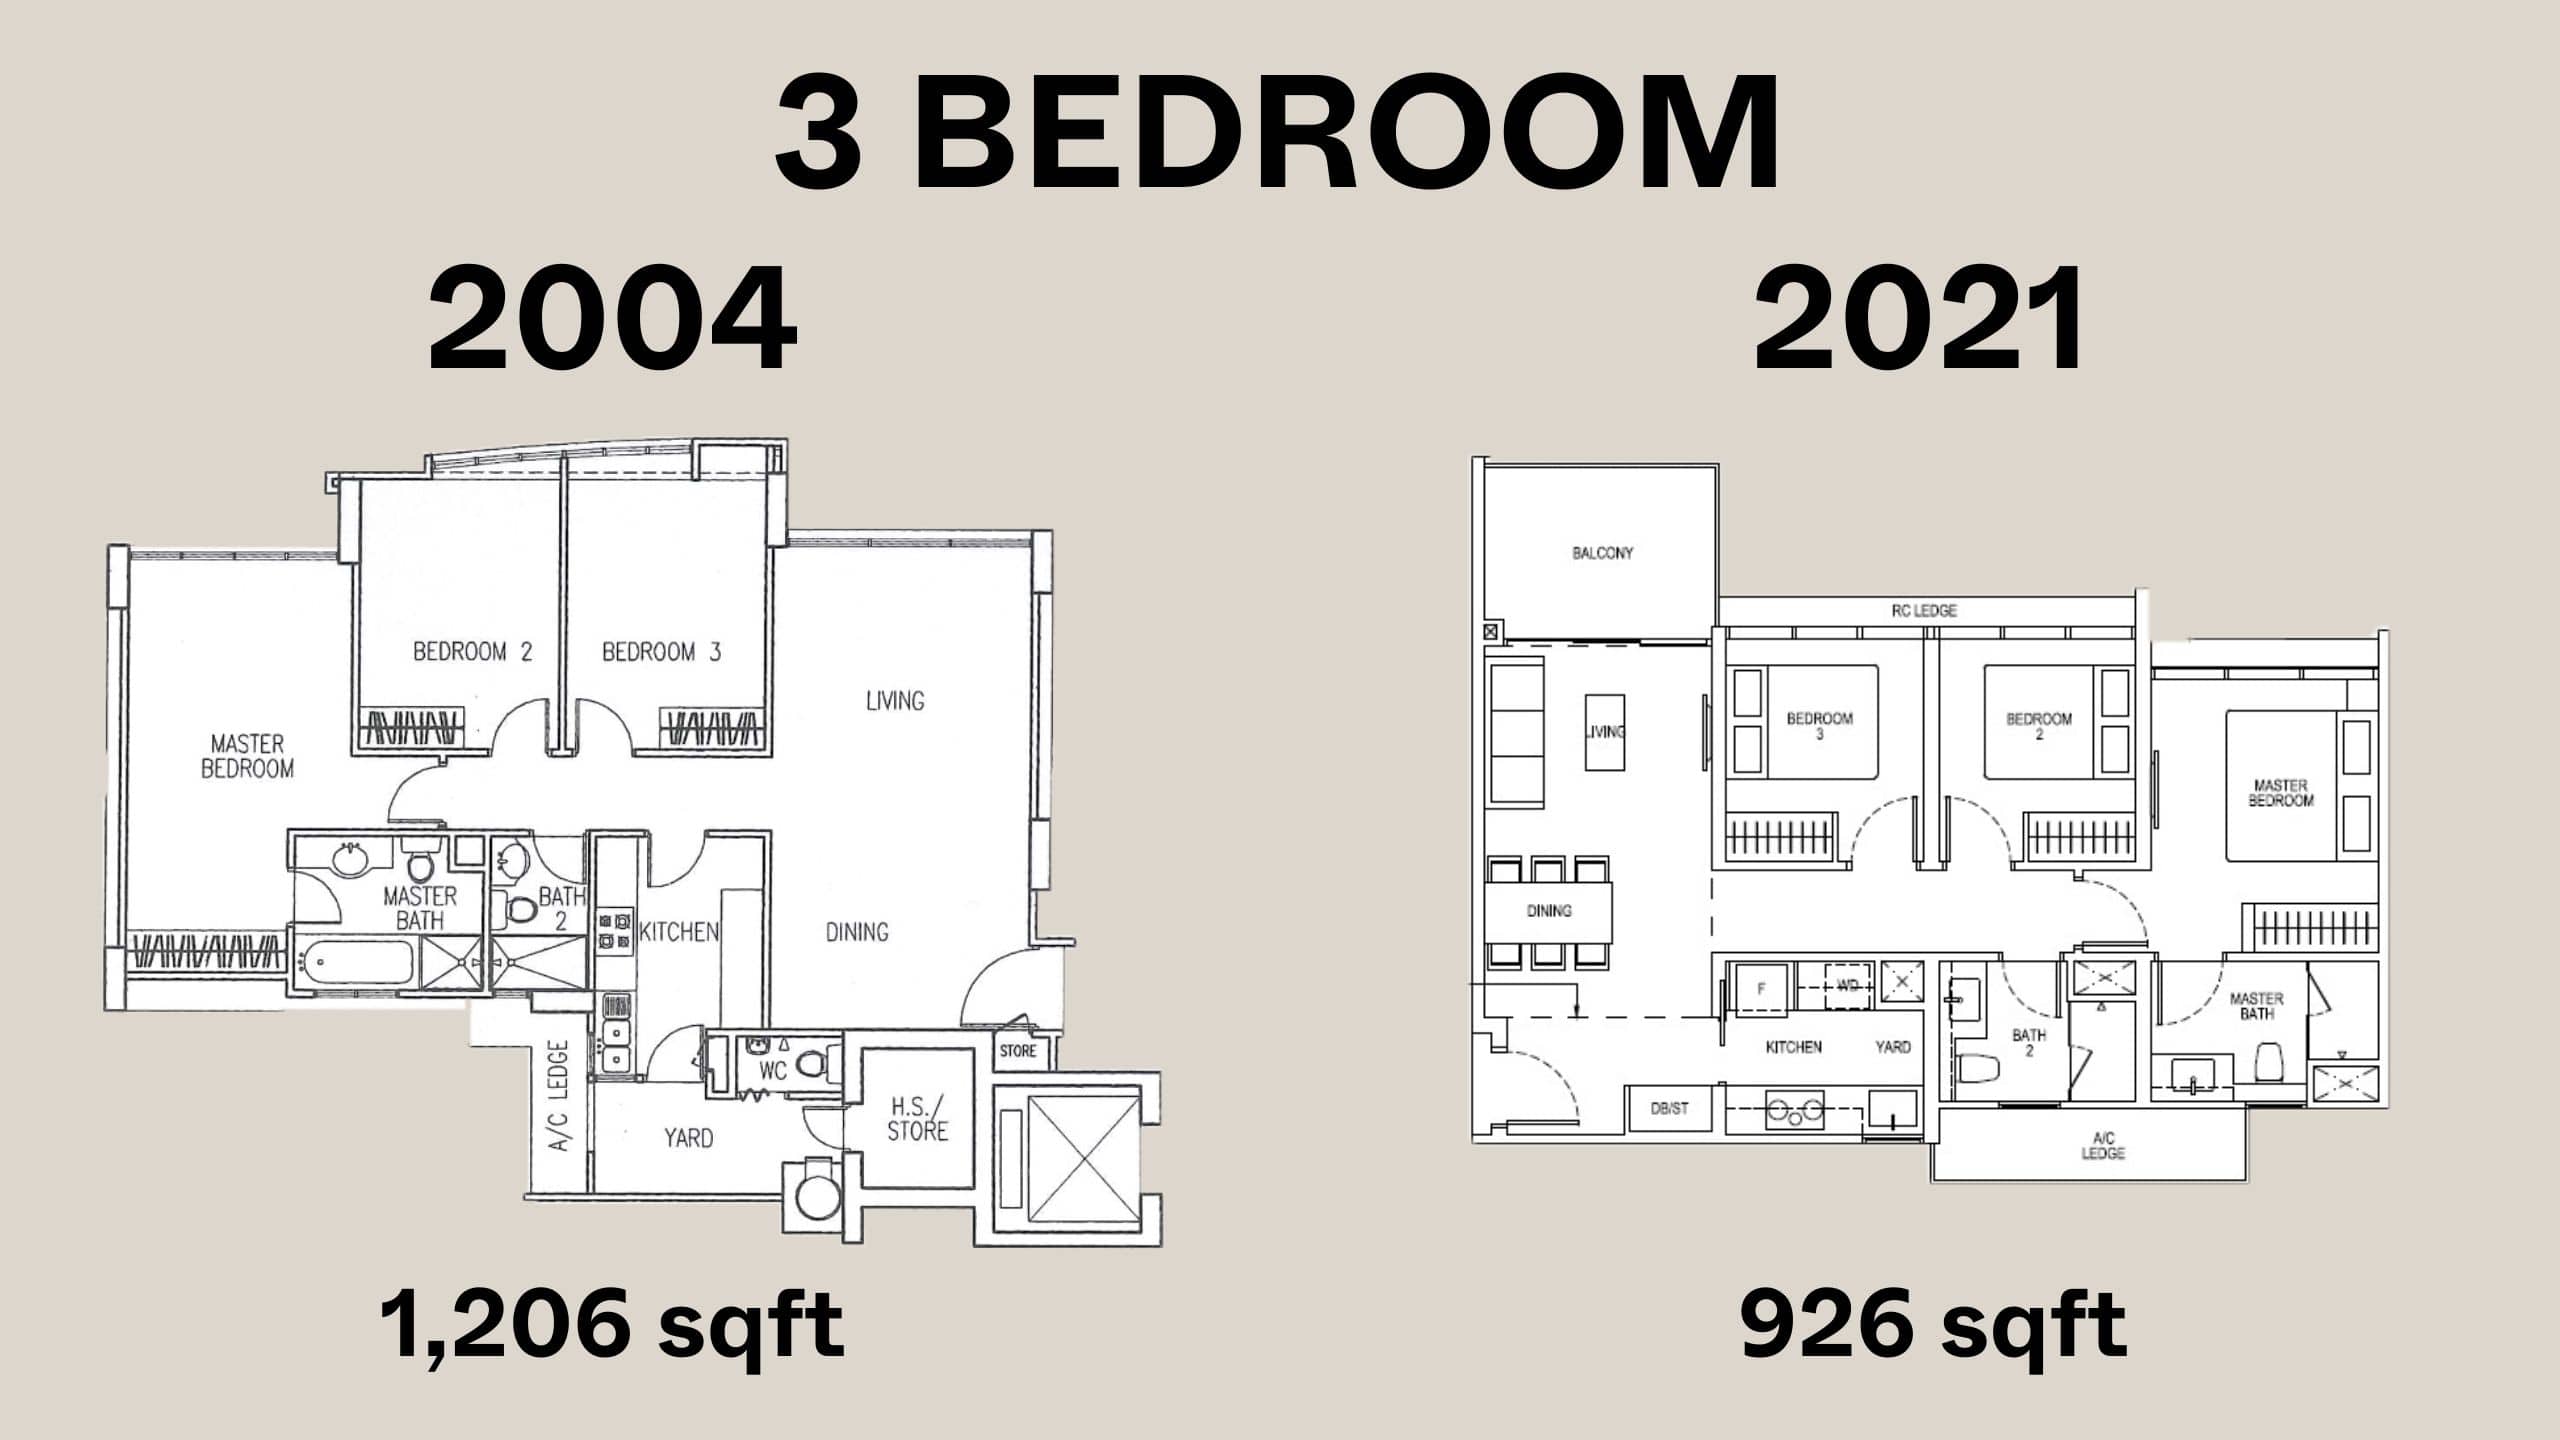 3 bedroom old new